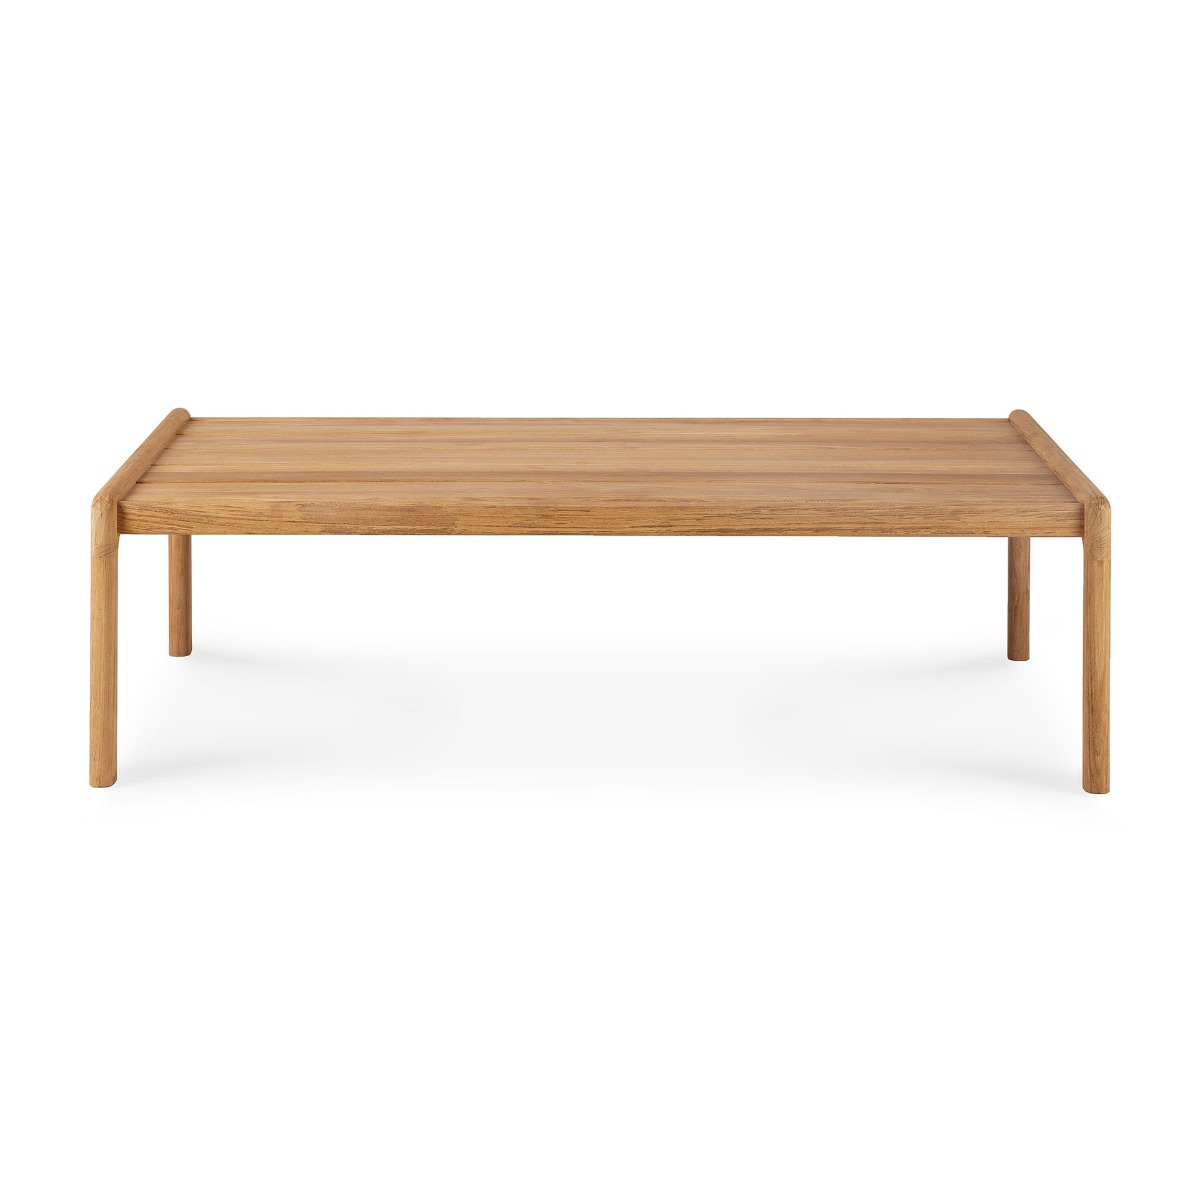 https://www.fundesign.nl/media/catalog/product/1/0/10258_teak_outdoor_jack_coffee_table_front_cut_web.jpg